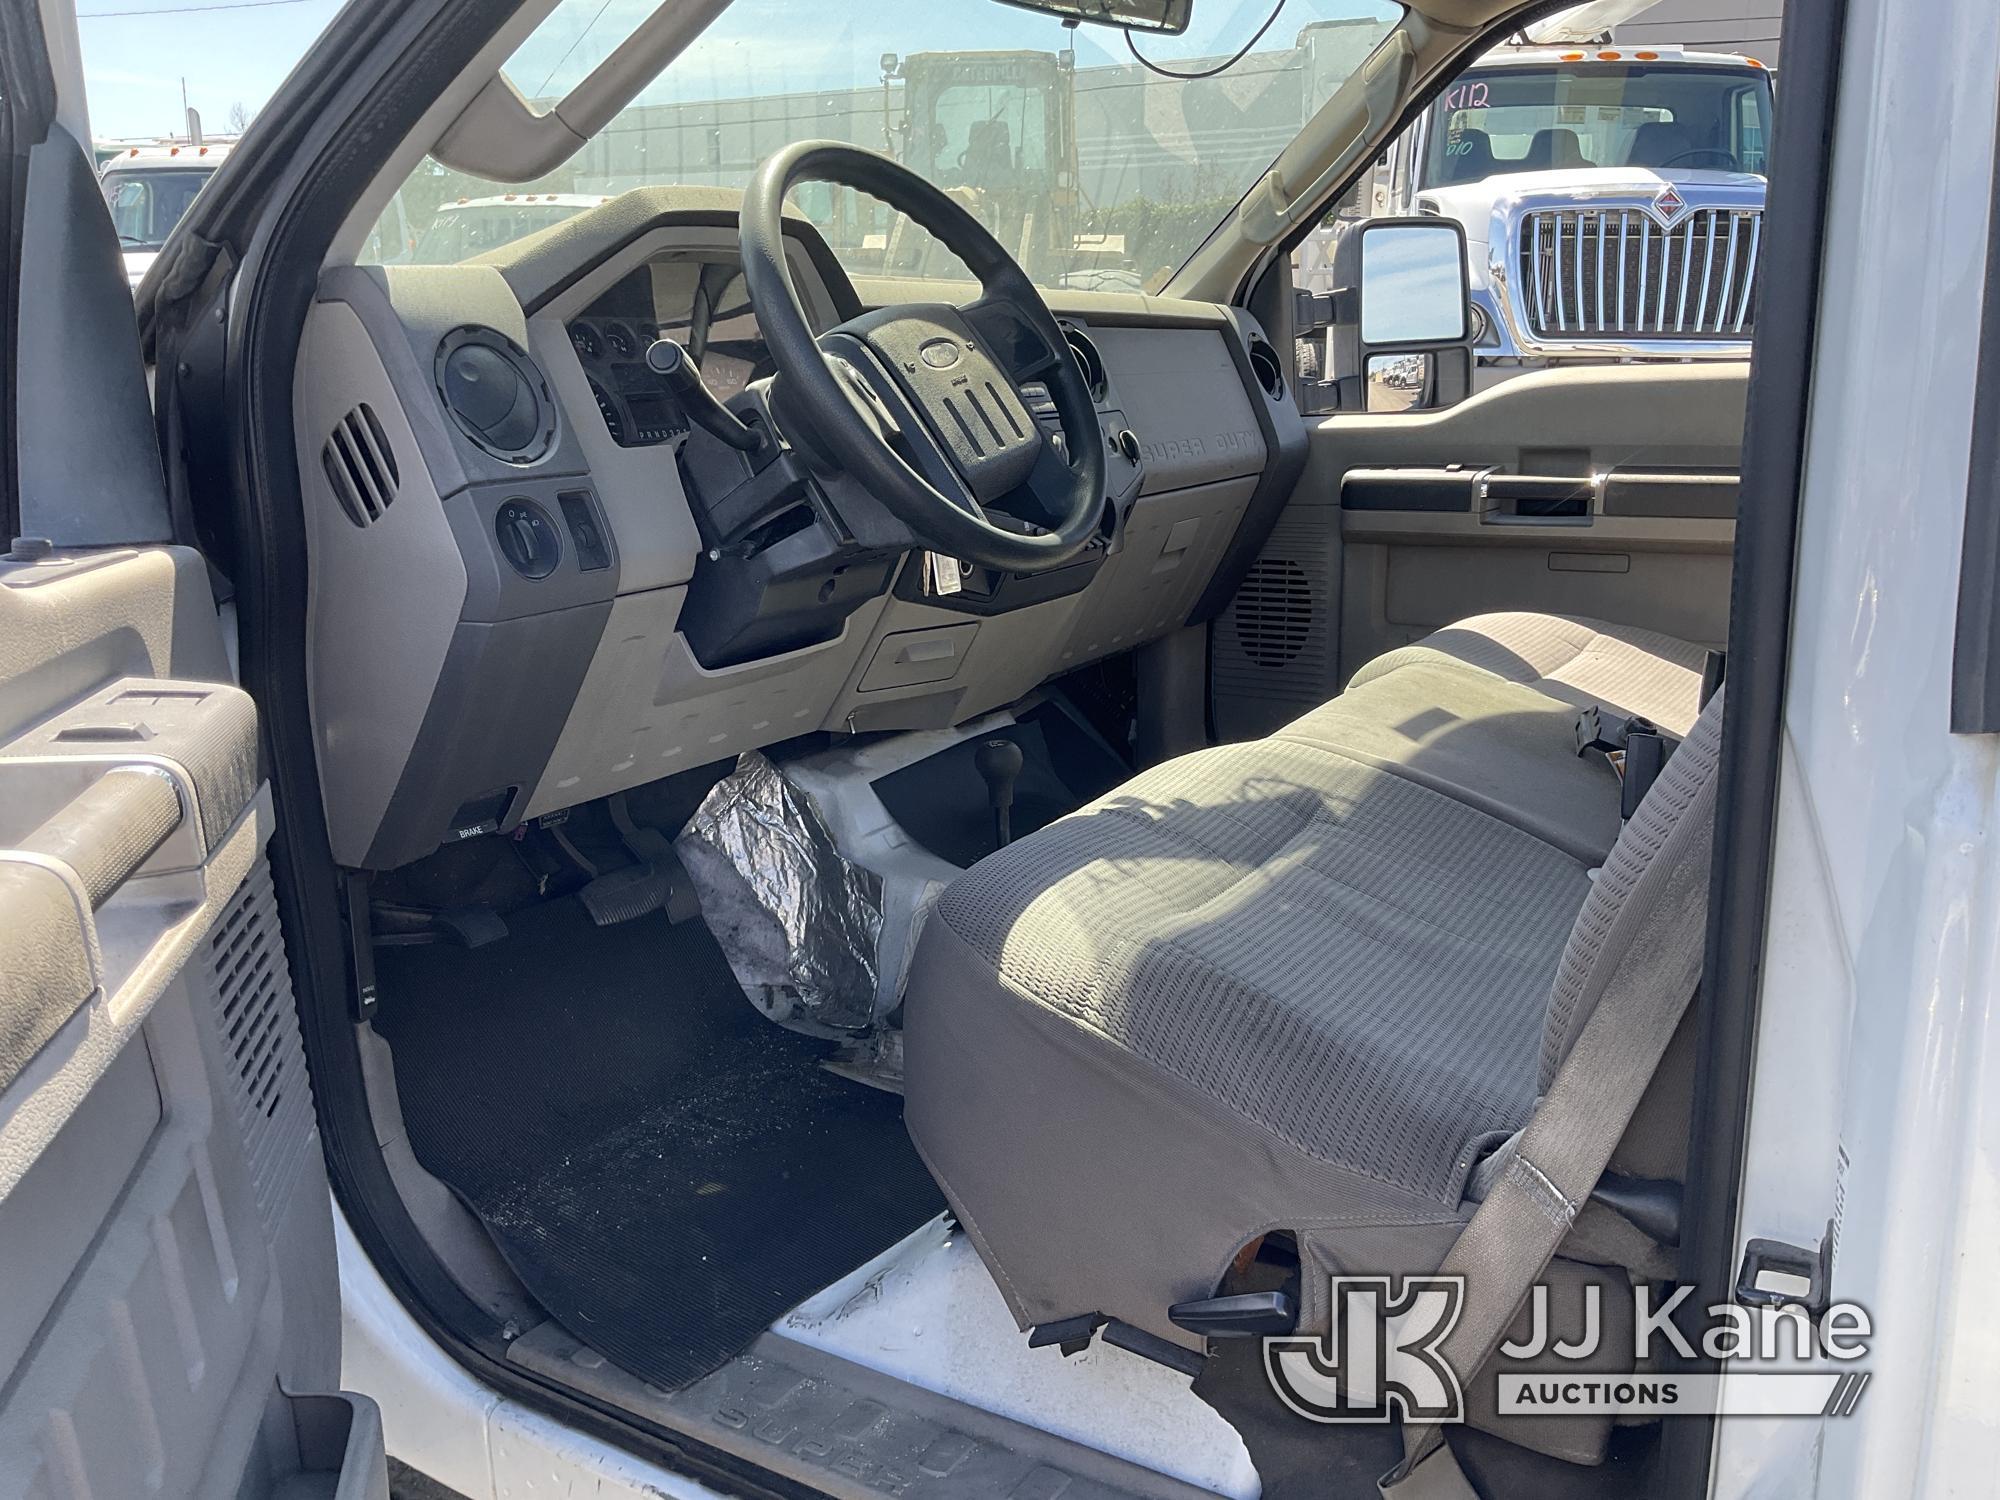 (Jurupa Valley, CA) 2008 Ford F350 4x4 Pickup Truck Not Running, Condition Unknown) (Body Damage